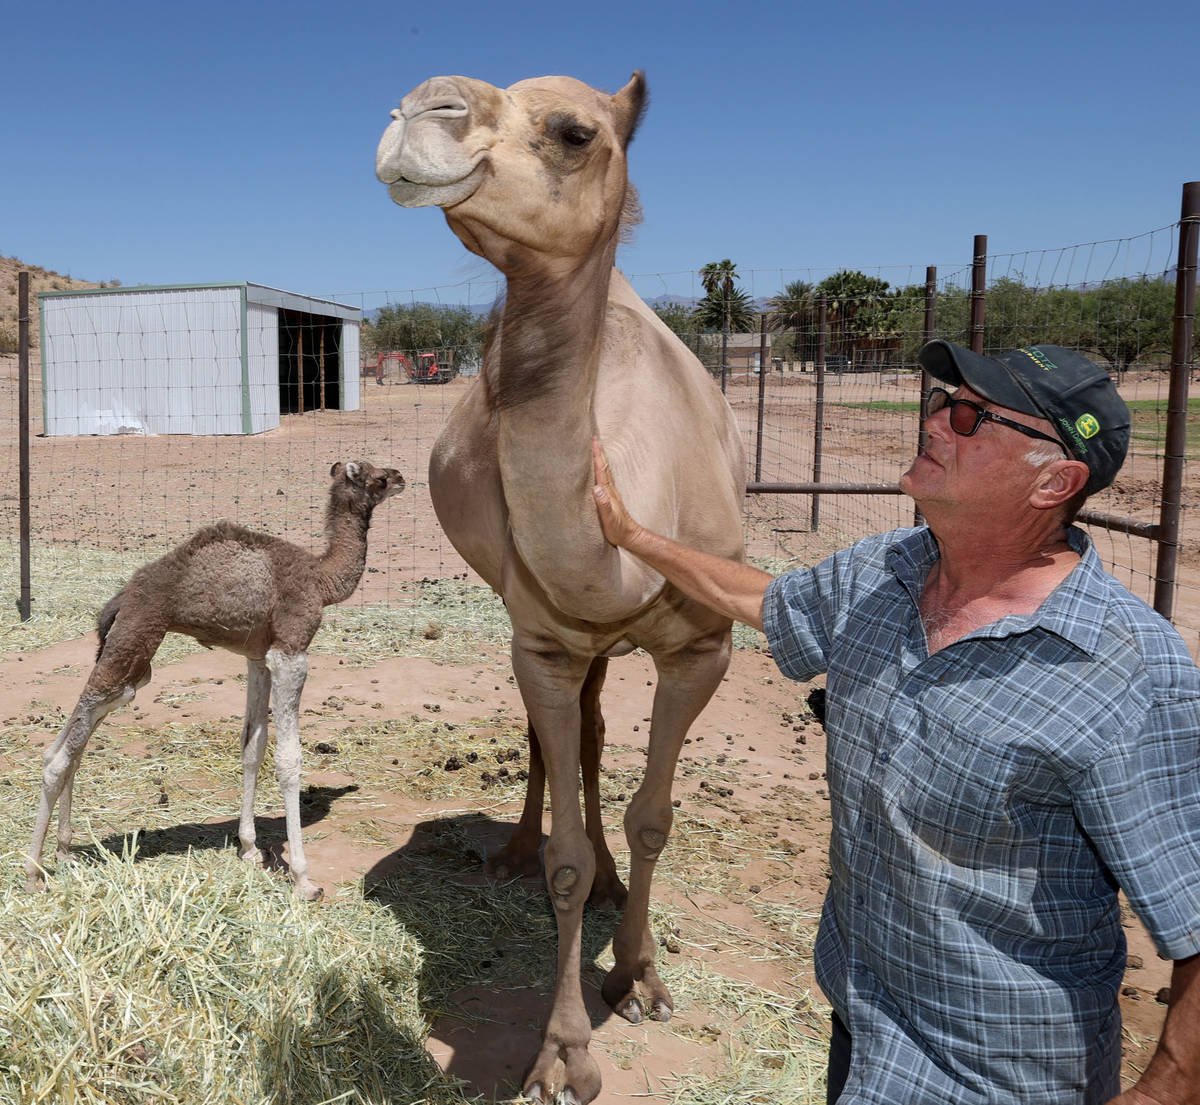 Baby camel Darlene, who was born Friday, June 26, roams at Camel Safari in Bunkerville as owner ...